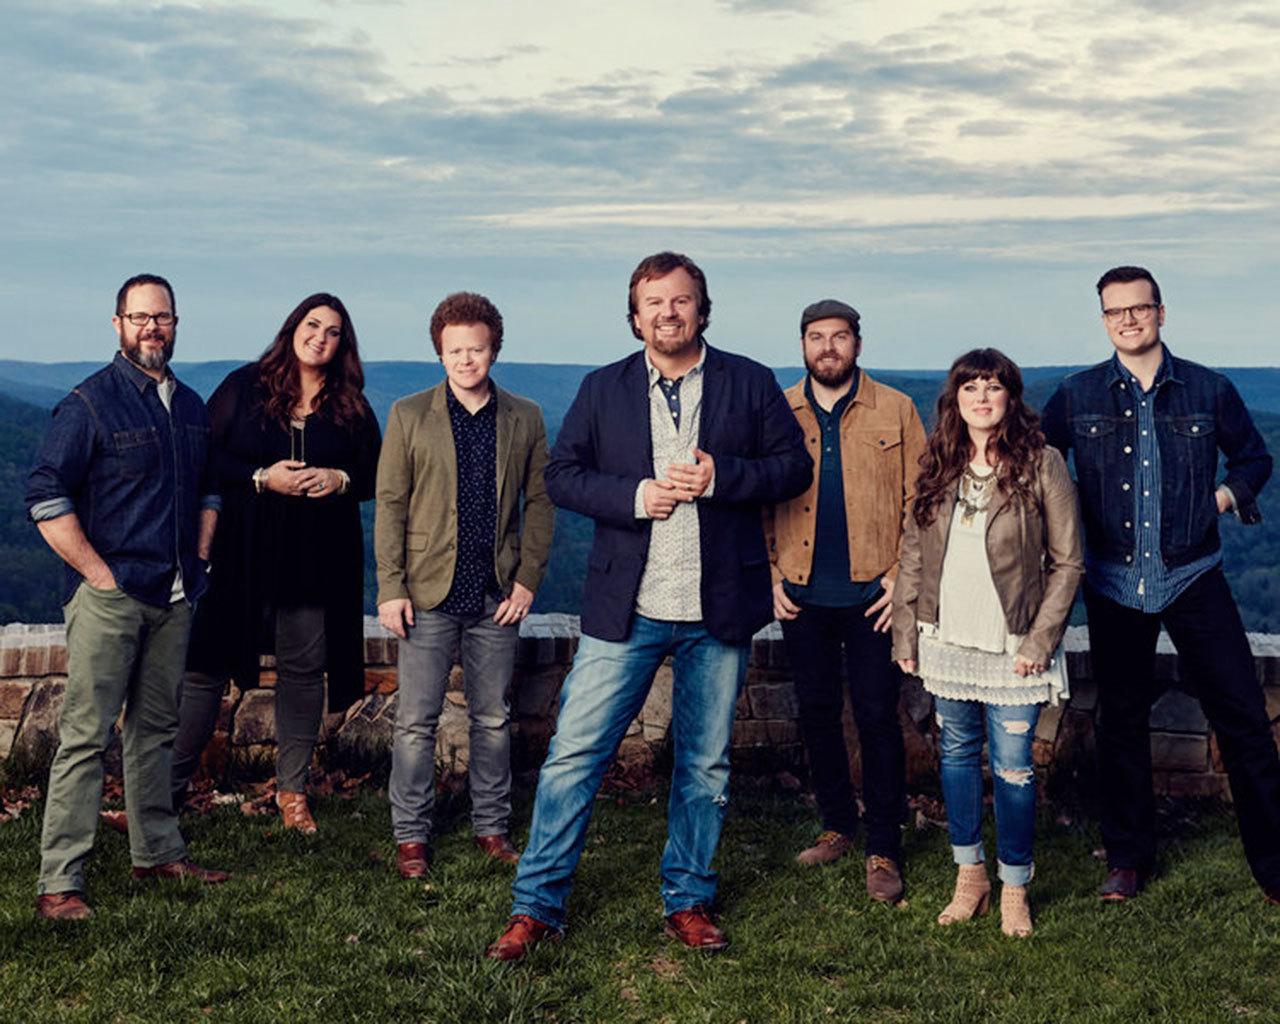 Casting Crowns is a contemporary Christian and Christian rock band started in 1999 by youth pastor Mark Hall, who serves as the band’s lead vocalist, as part of a youth group at First Baptist Church in Daytona Beach, Fla. COURTESY PHOTO